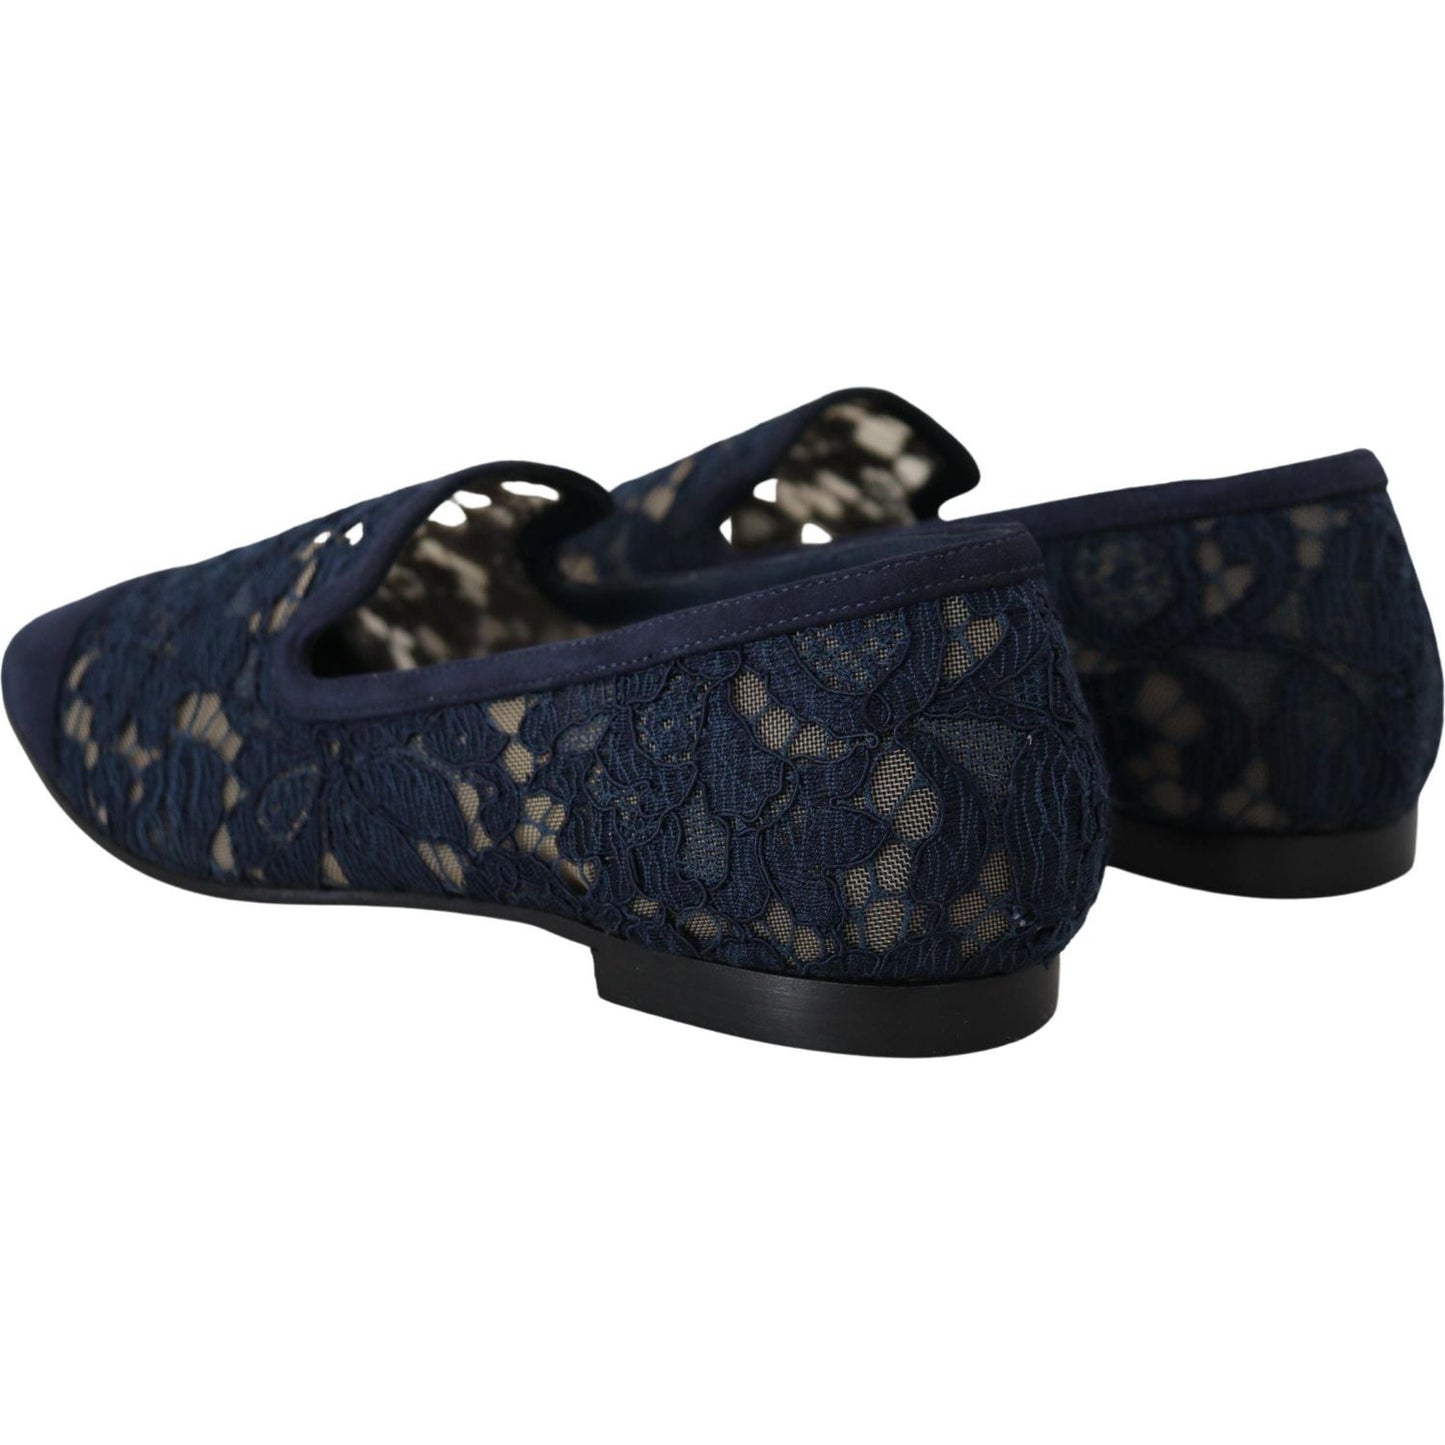 Dolce & Gabbana Elegant Blue Loafers Flats - Summer Chic blue-floral-lace-slip-ons-loafers-flats-shoes